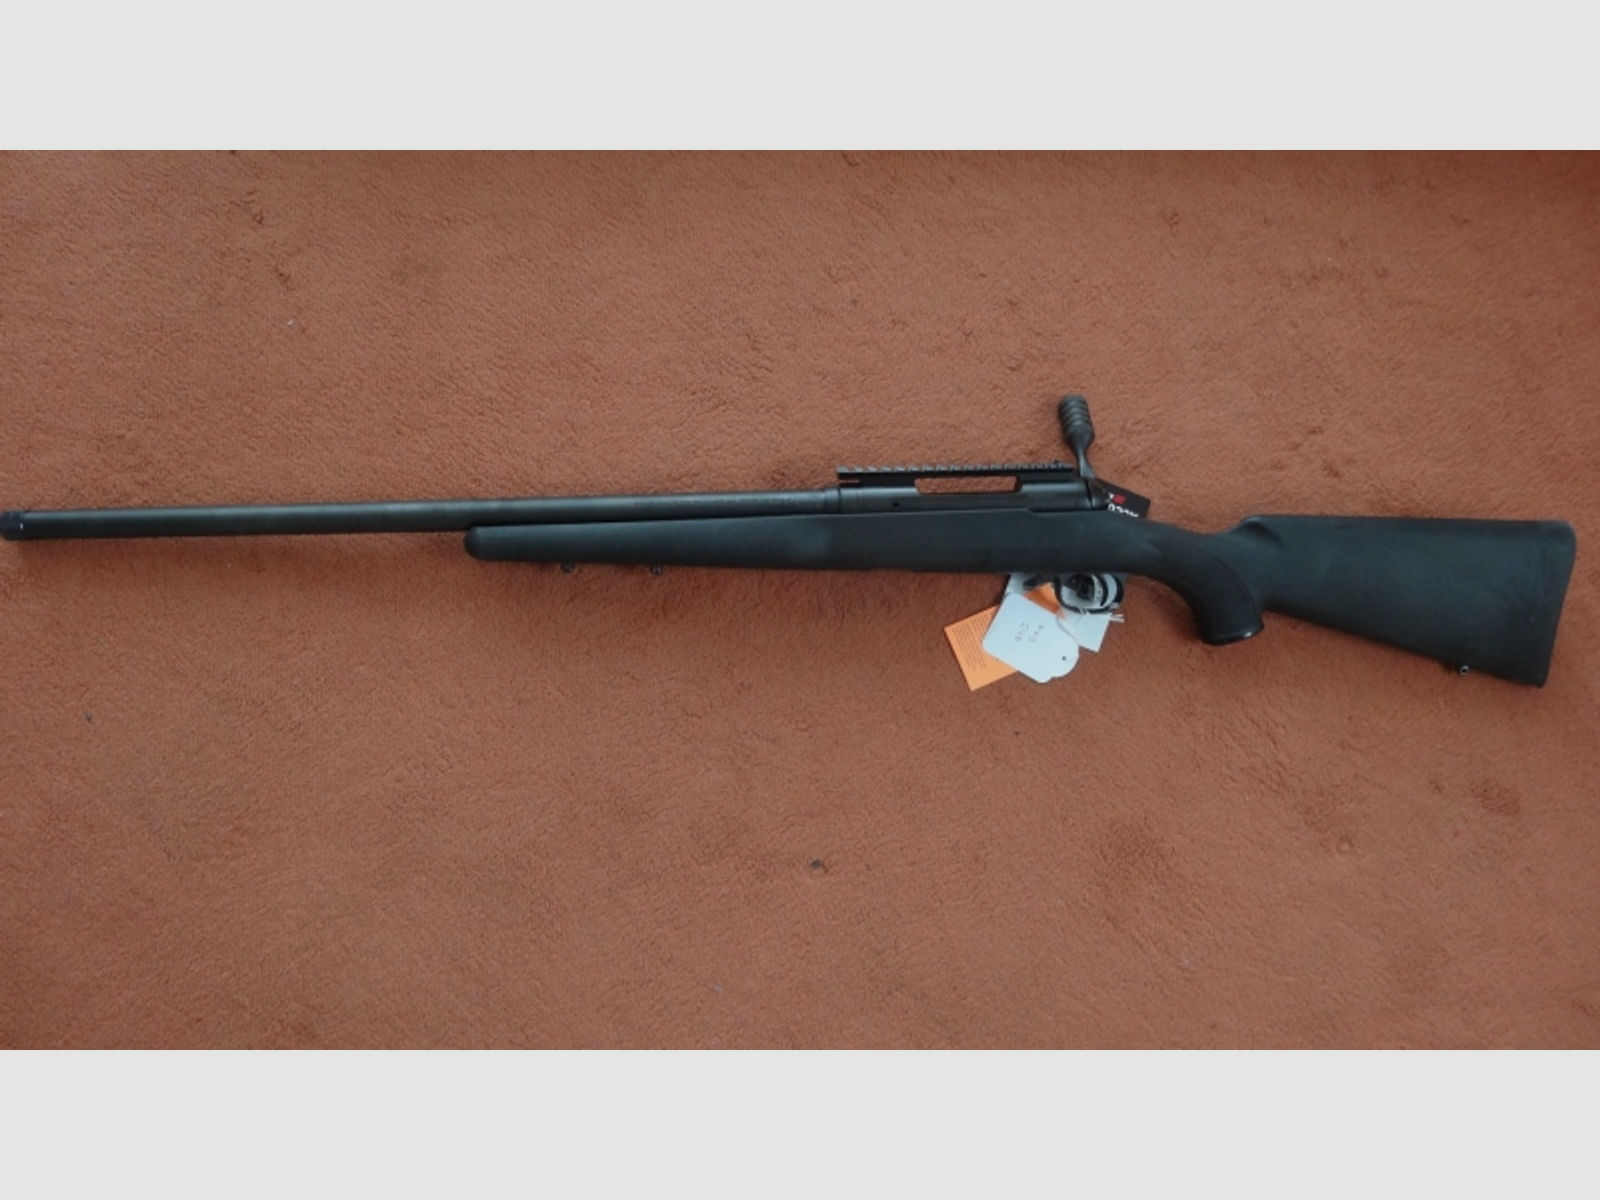 REPETIER-BÜCHSE: SAVAGE ARMS MODELL 10 TR KALIBER .308 WIN,